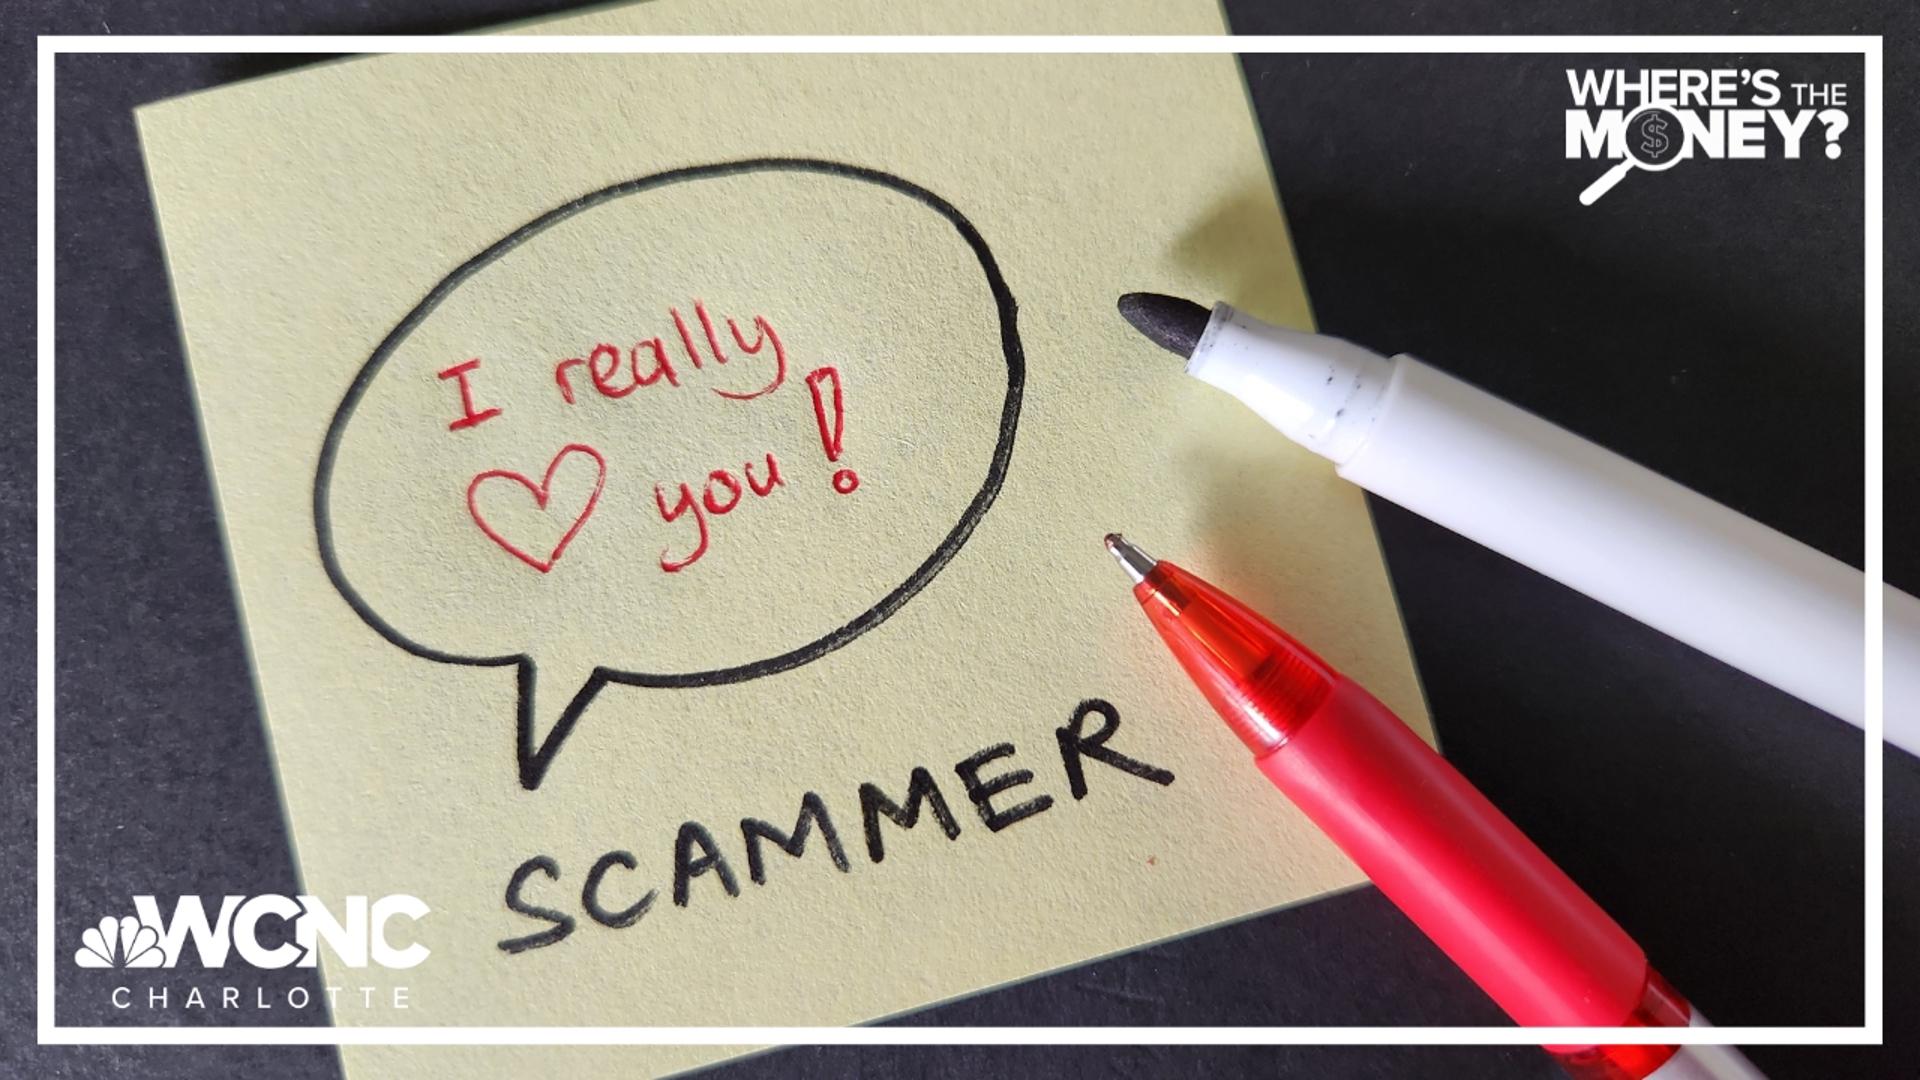 A former scammer turned consultant revealed how fraudsters exploit their victims' emotions and eventually finances.